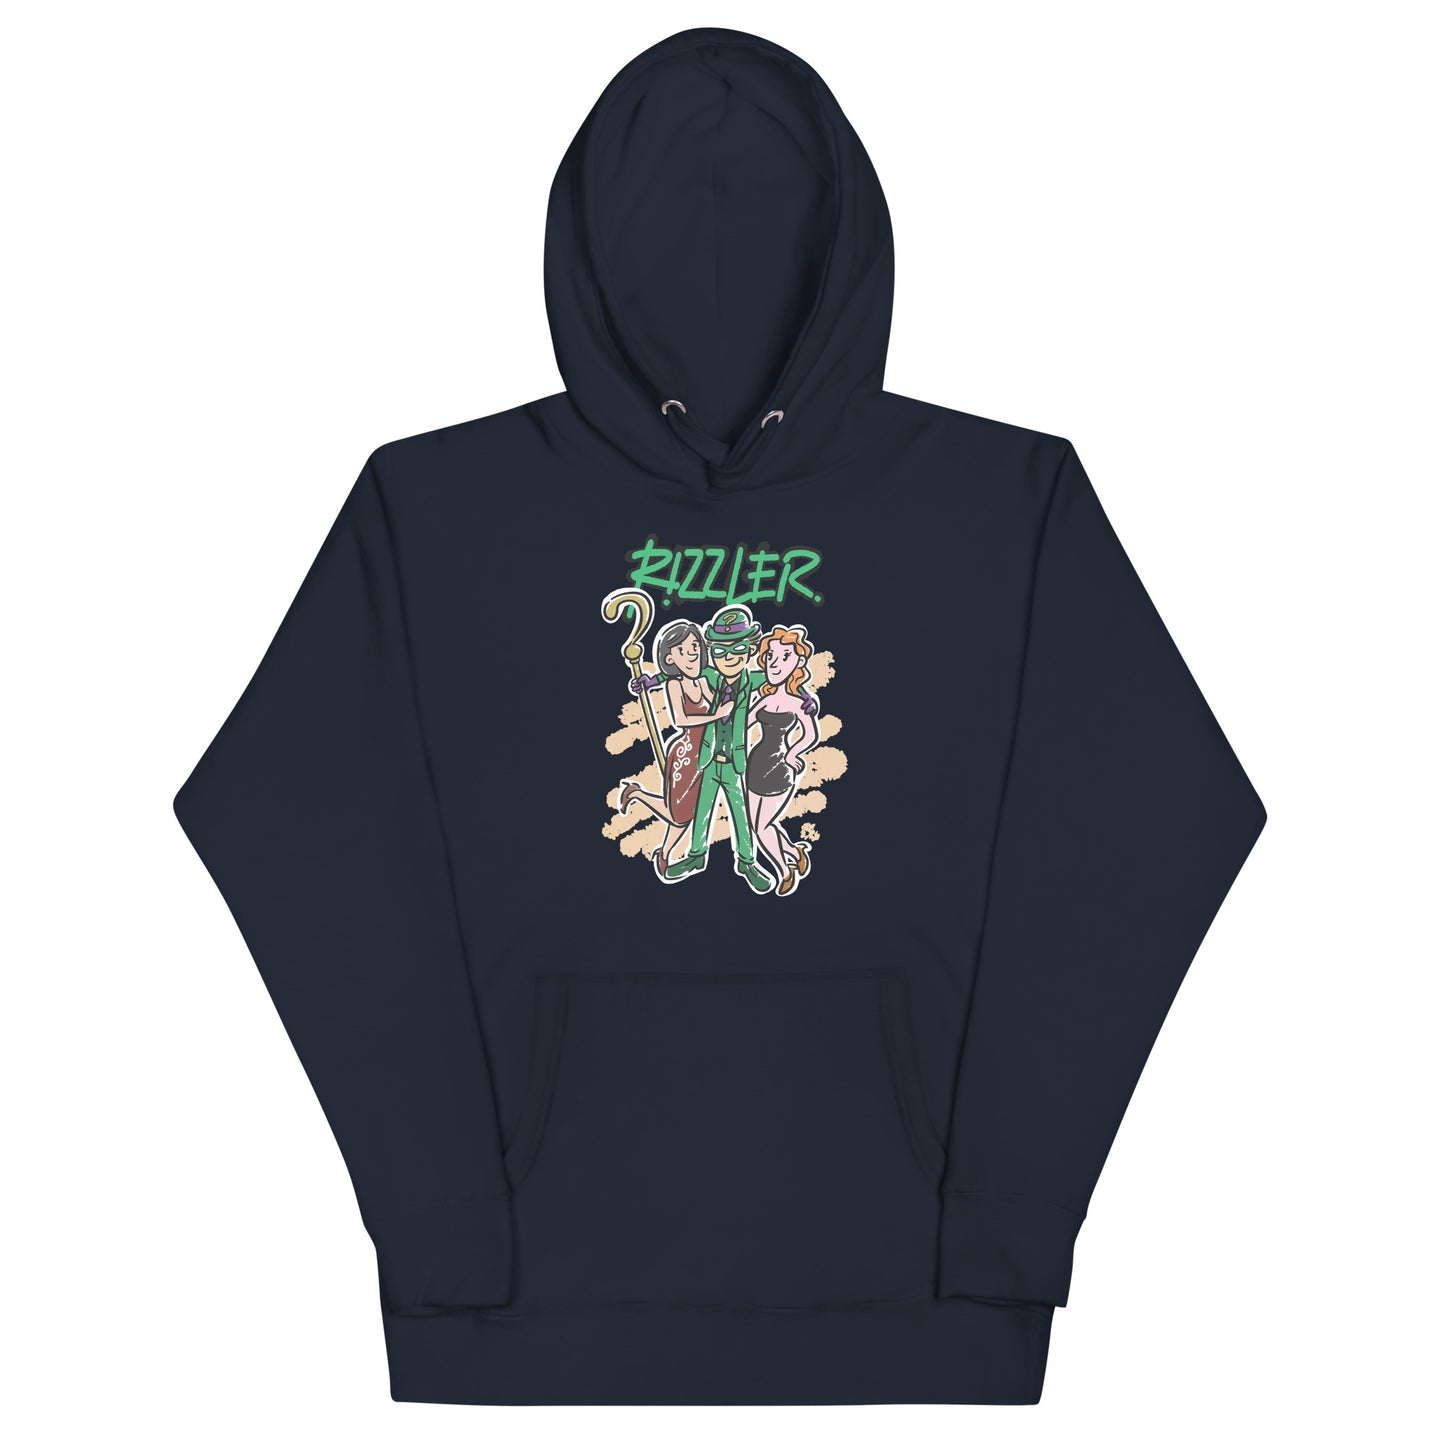 The Rizzler Unisex Hoodie